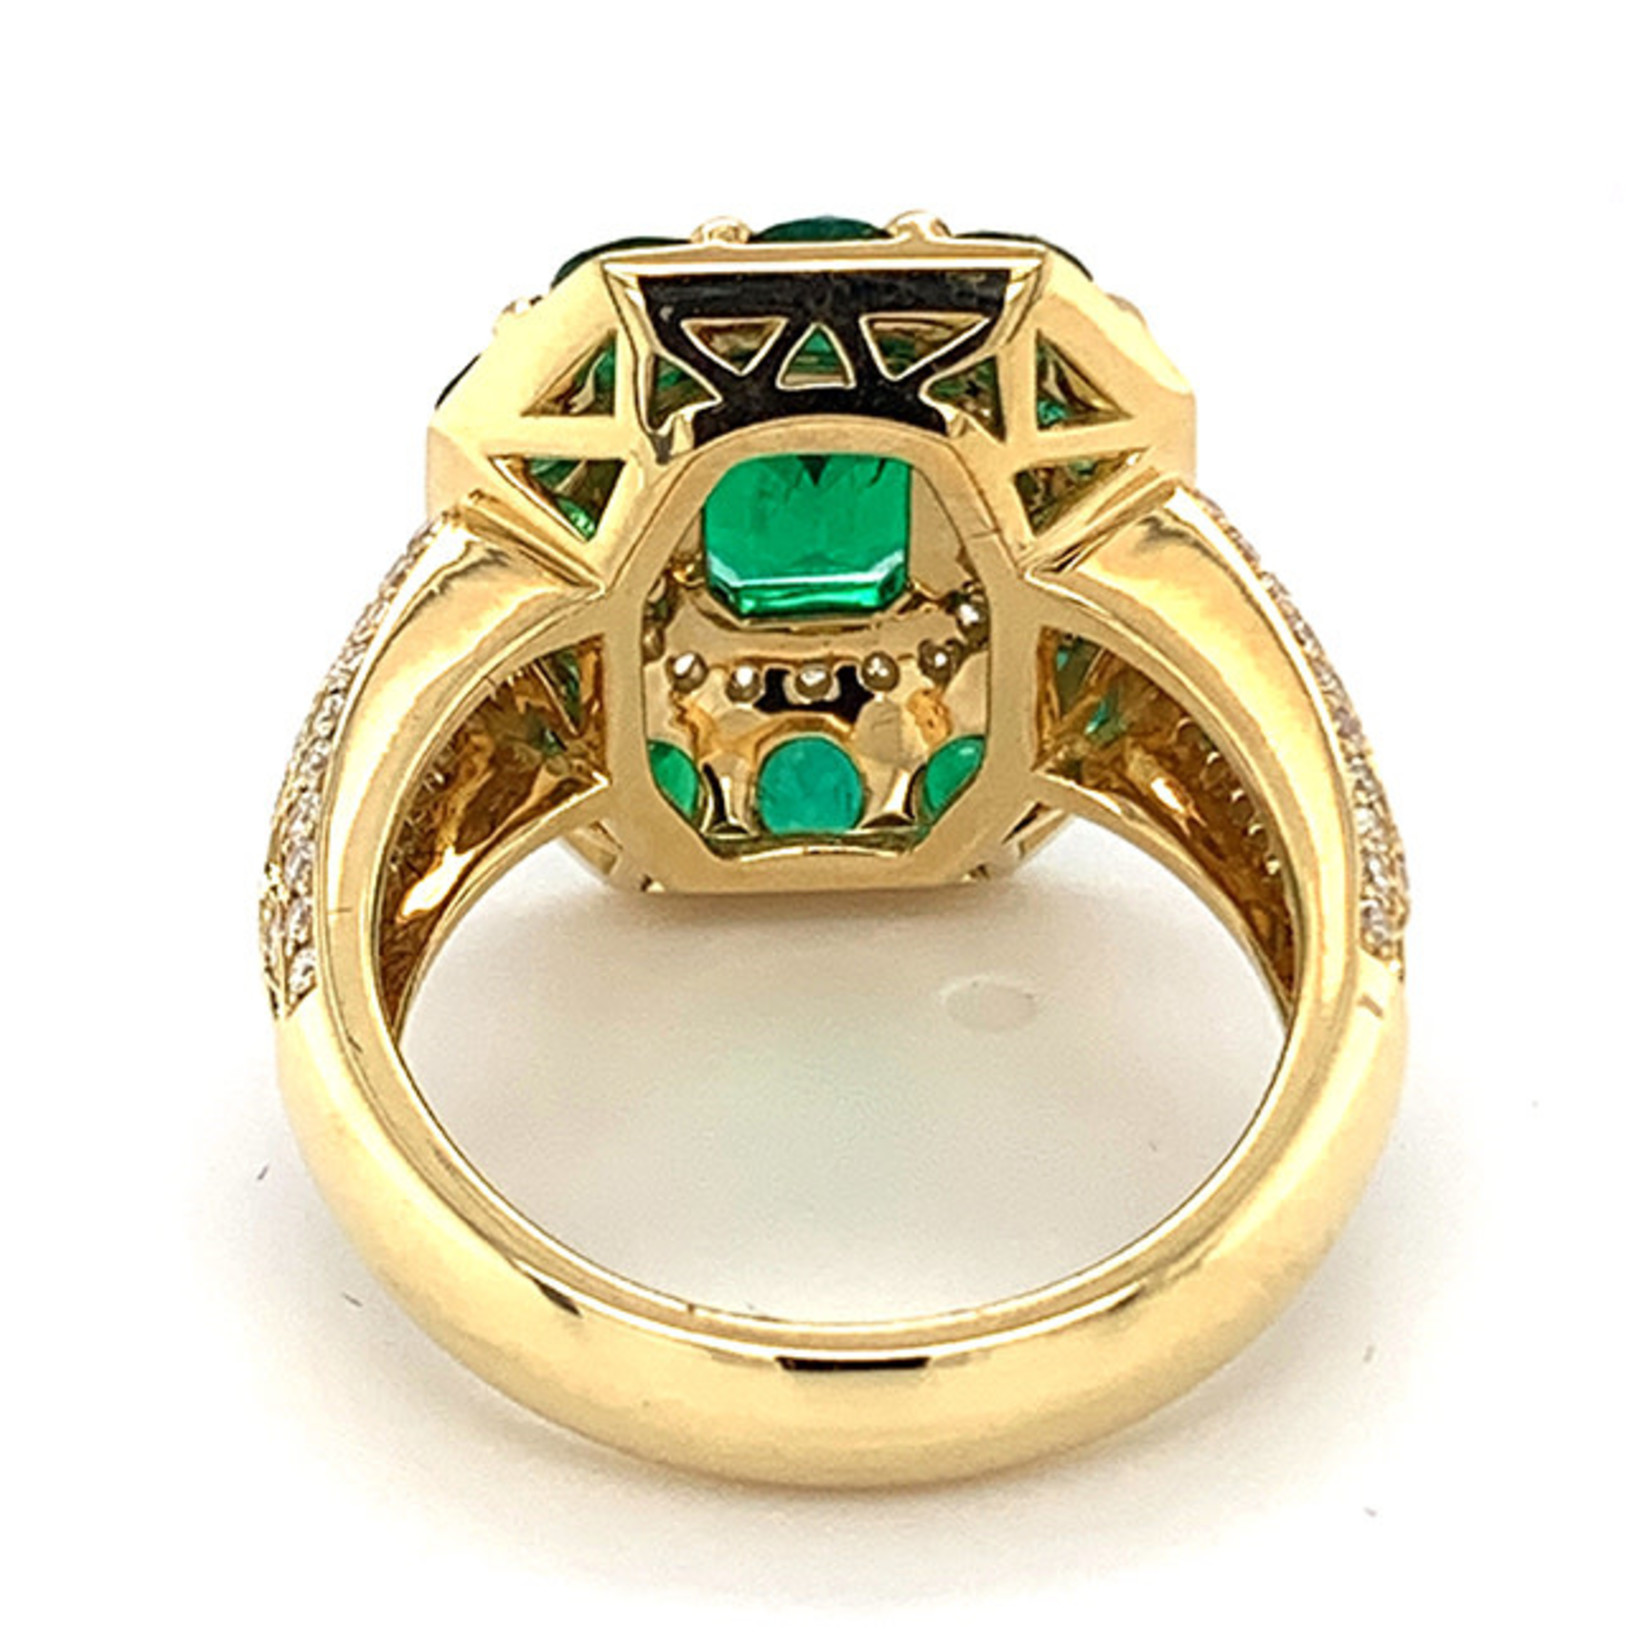 Jewelry By Danuta - Gold Drawer Colombian Emerald & Diamond Gold Ring,1.15 ct Colombian Emerald,1.88ct side E, .62ct Dia